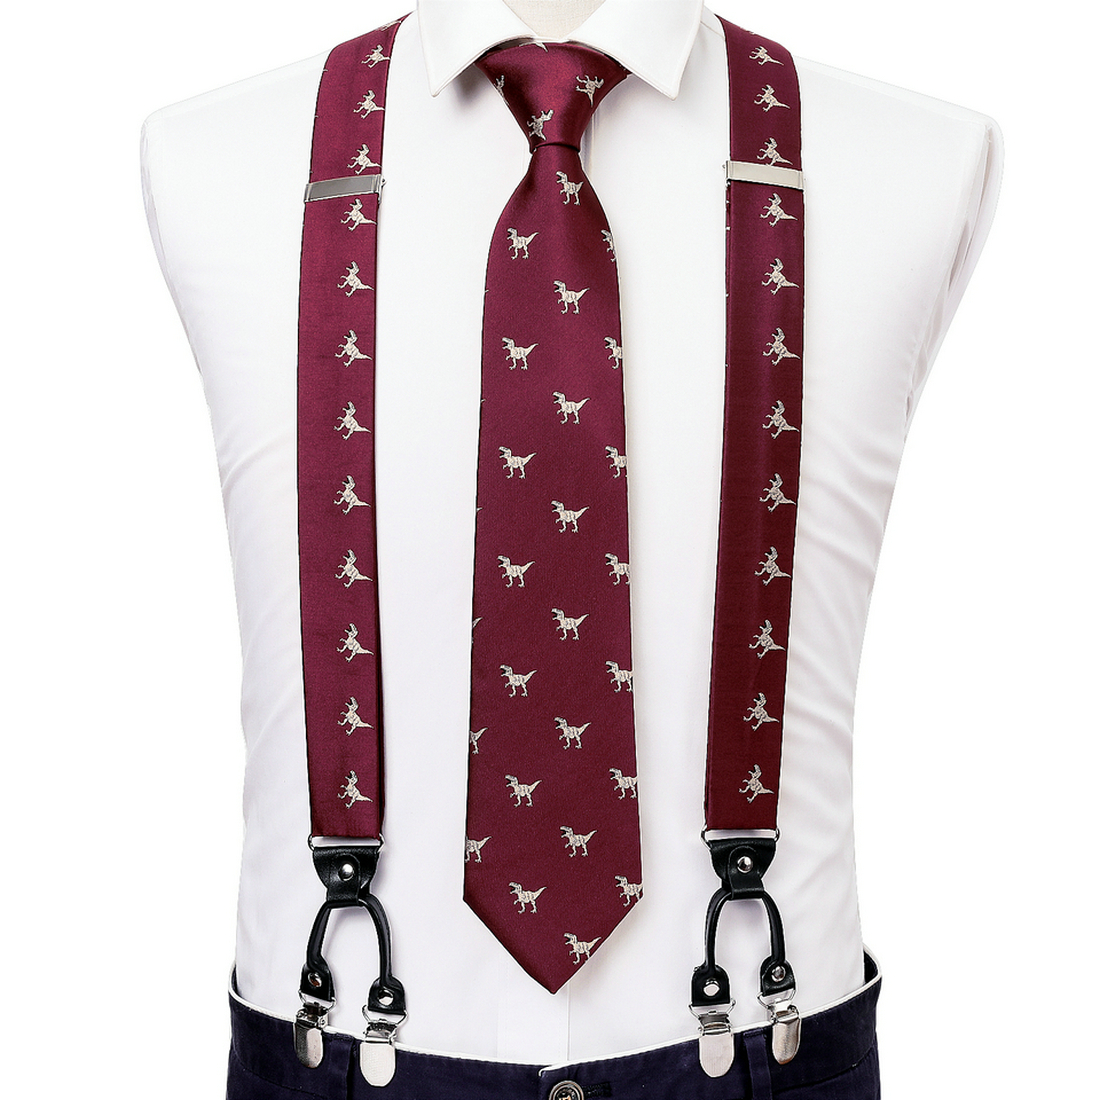 Barry Wang Mens Suspenders Tie Set Adjustable Clips Y Type Suspender And  Necktie Handkerchief Cufflinks Set Formal Casual Gray Green Red Golden, Check Out Today's Deals Now